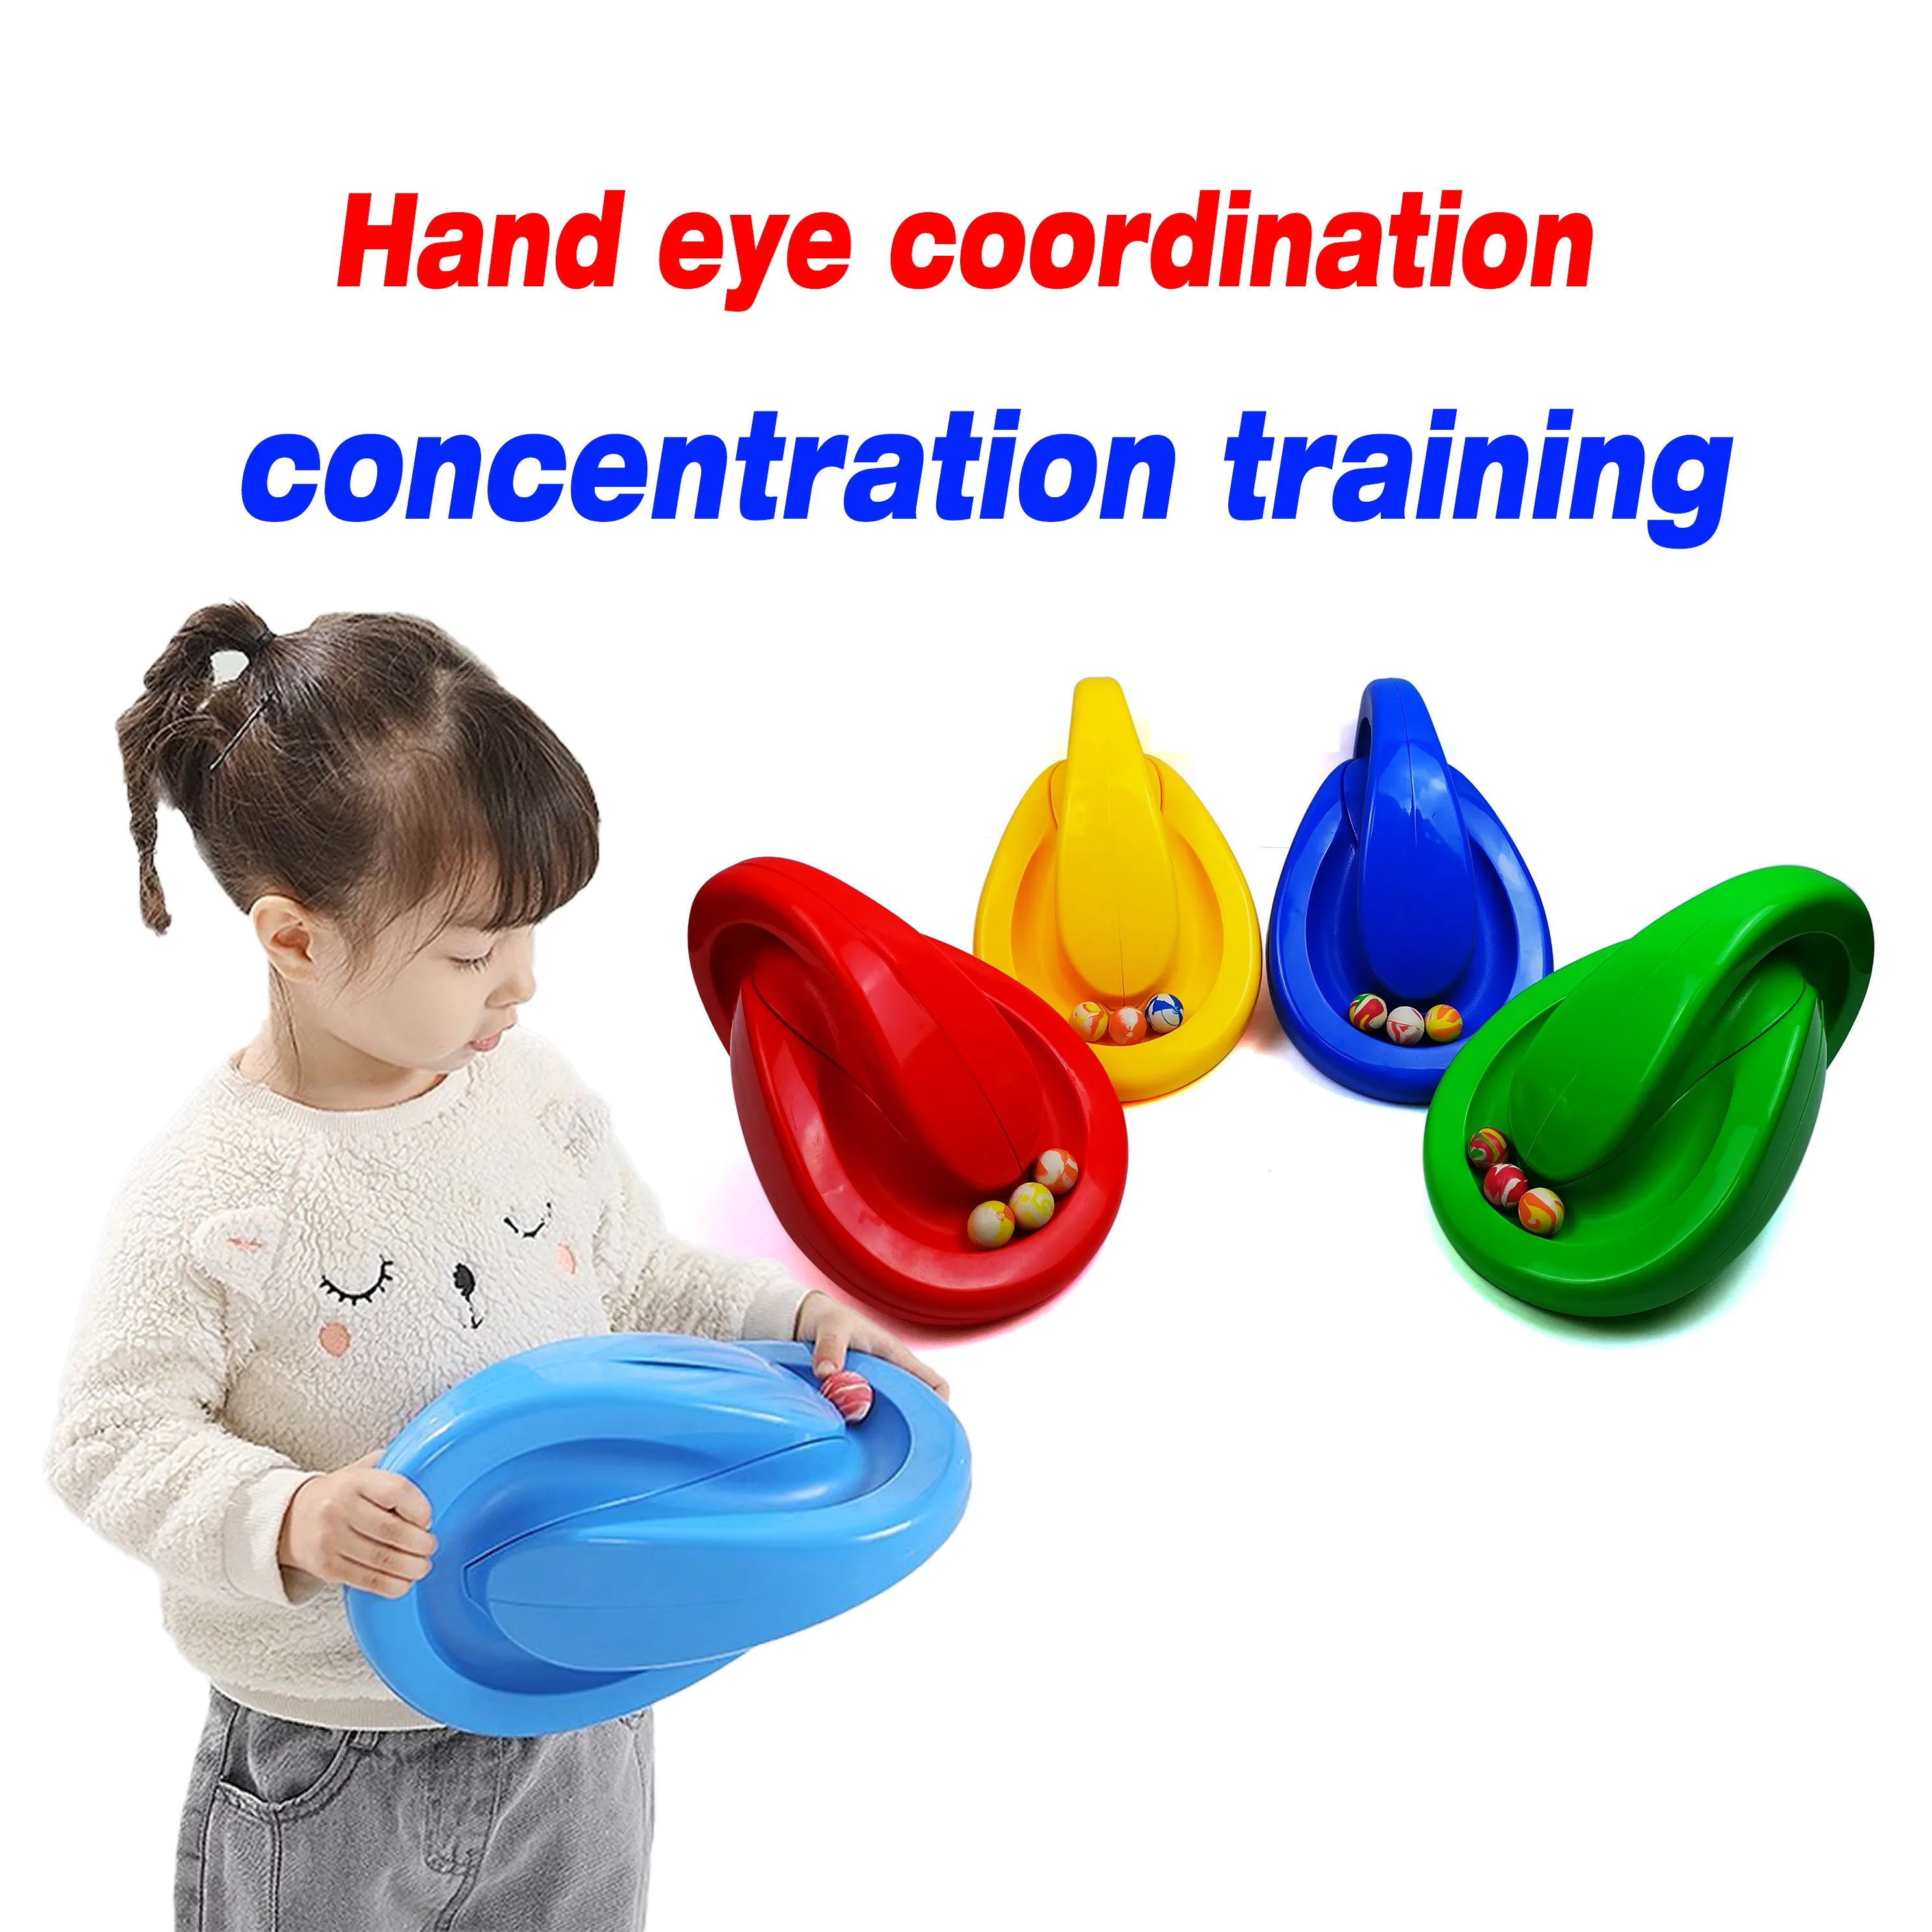 Kids' Sensory Turntable Toy for Hand-Eye Coordination and Concentration Training